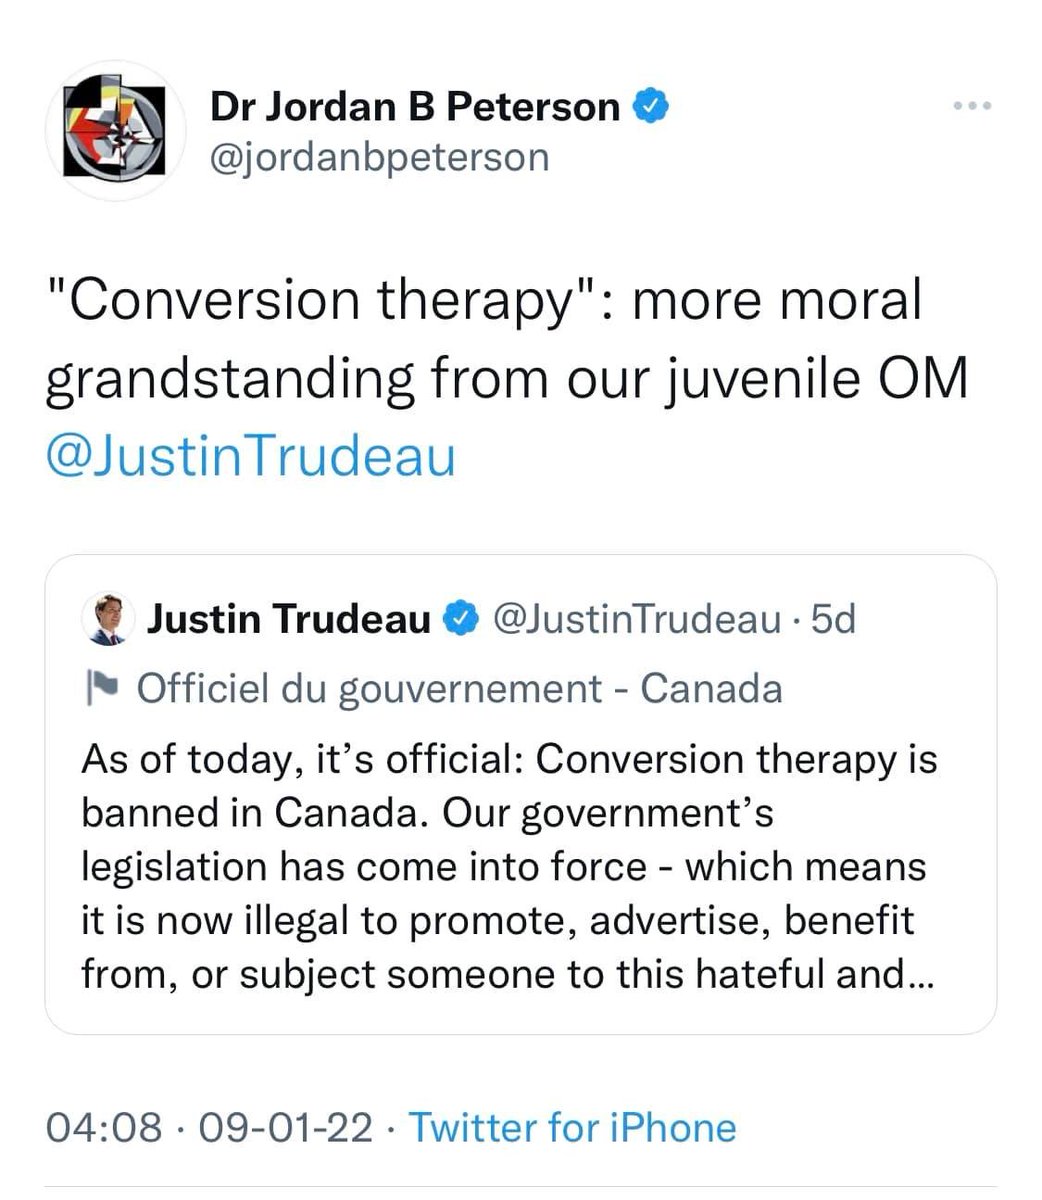 If you ever bought into @jordanbpeterson. Conversion therapy; where children & adults are forced into sessions to 'convert' them out of being gay (impossible), is disgusting. This banning by @JustinTrudeau isn't moral grandstanding, it is moral.